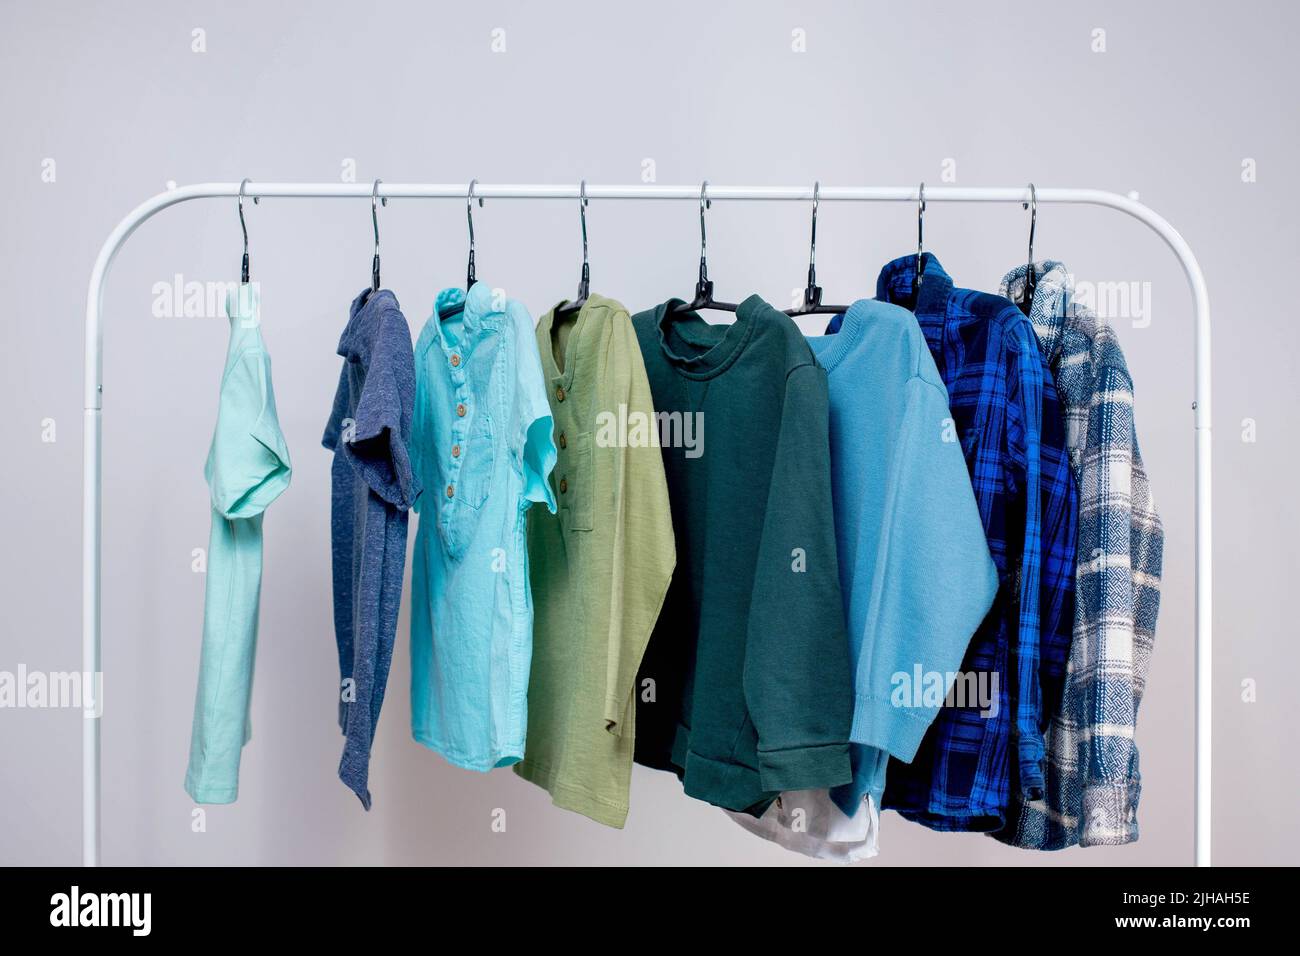 Premium Photo  Large selection of bright, colored children's clothes for a  girl hanging in a closet, on hangers.